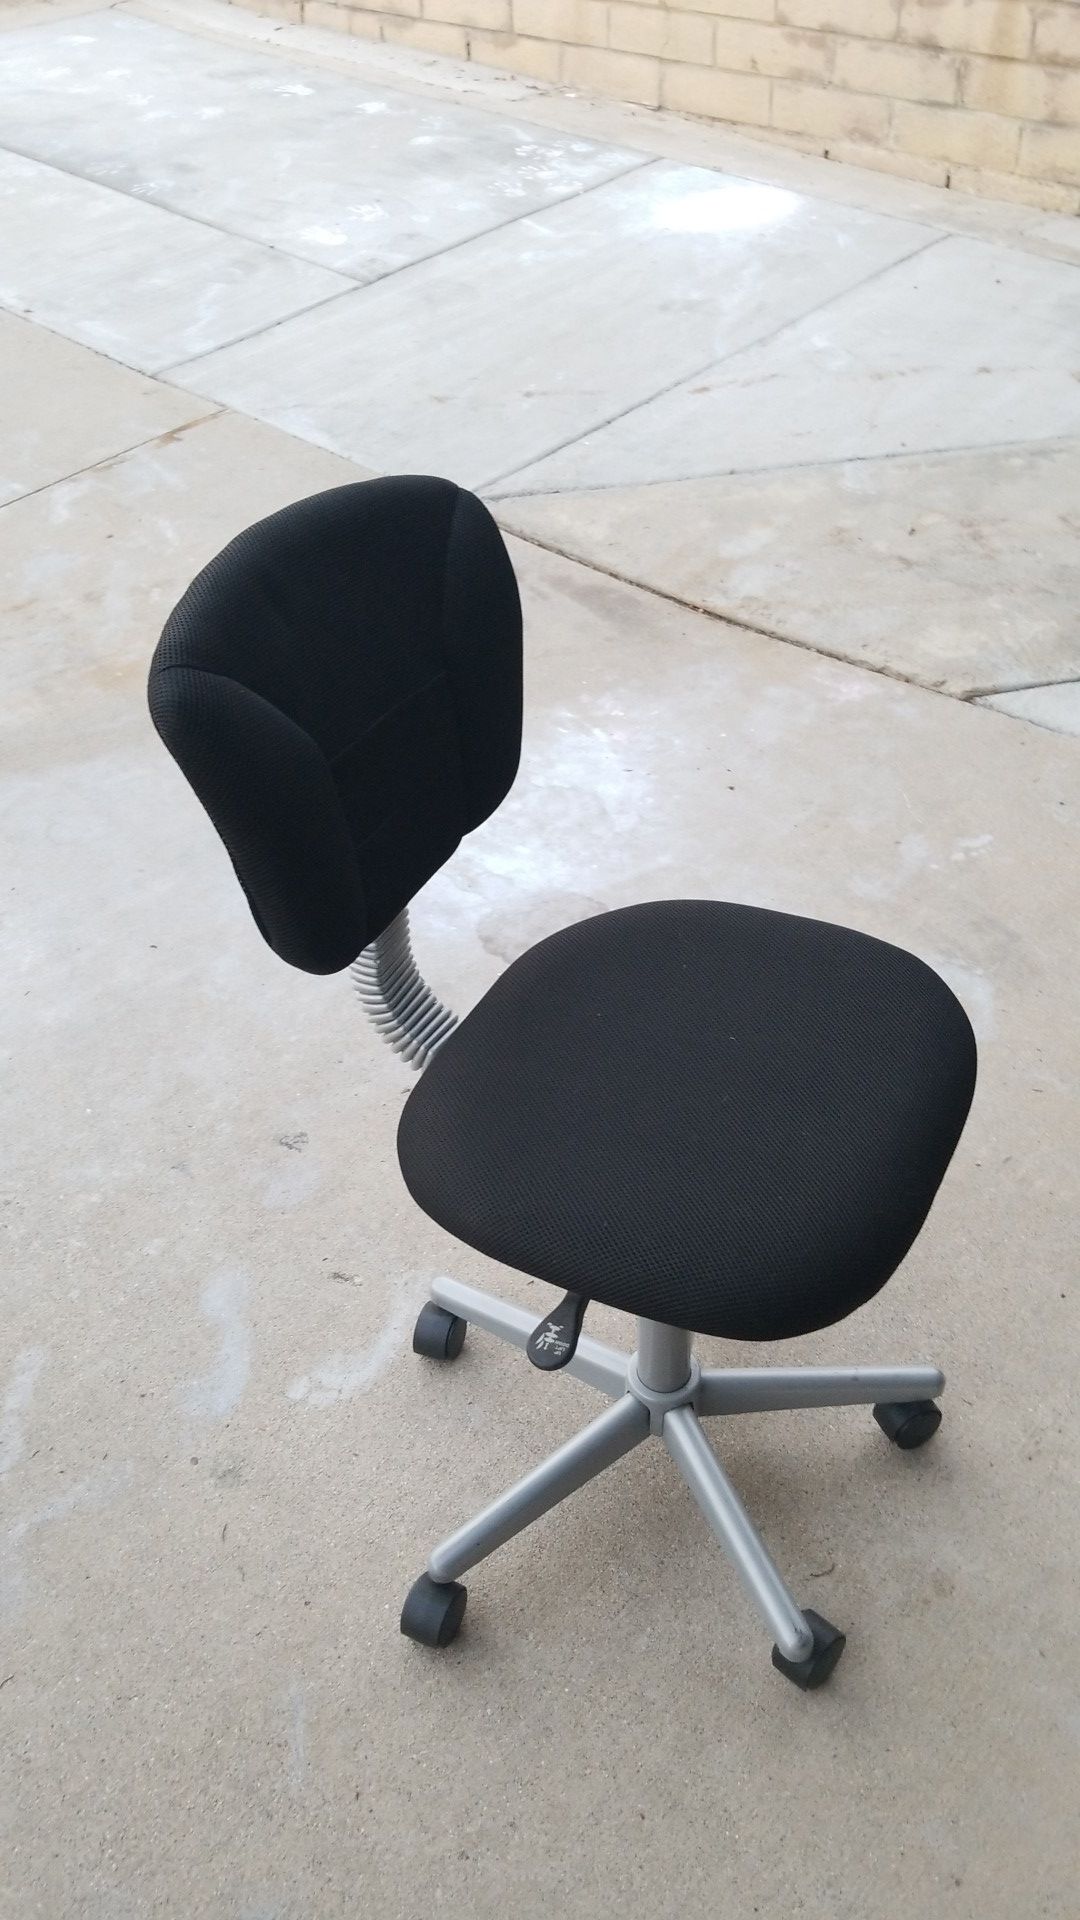 Computer chairs. Adjustable up and down. Like new! $6 each (4 total).